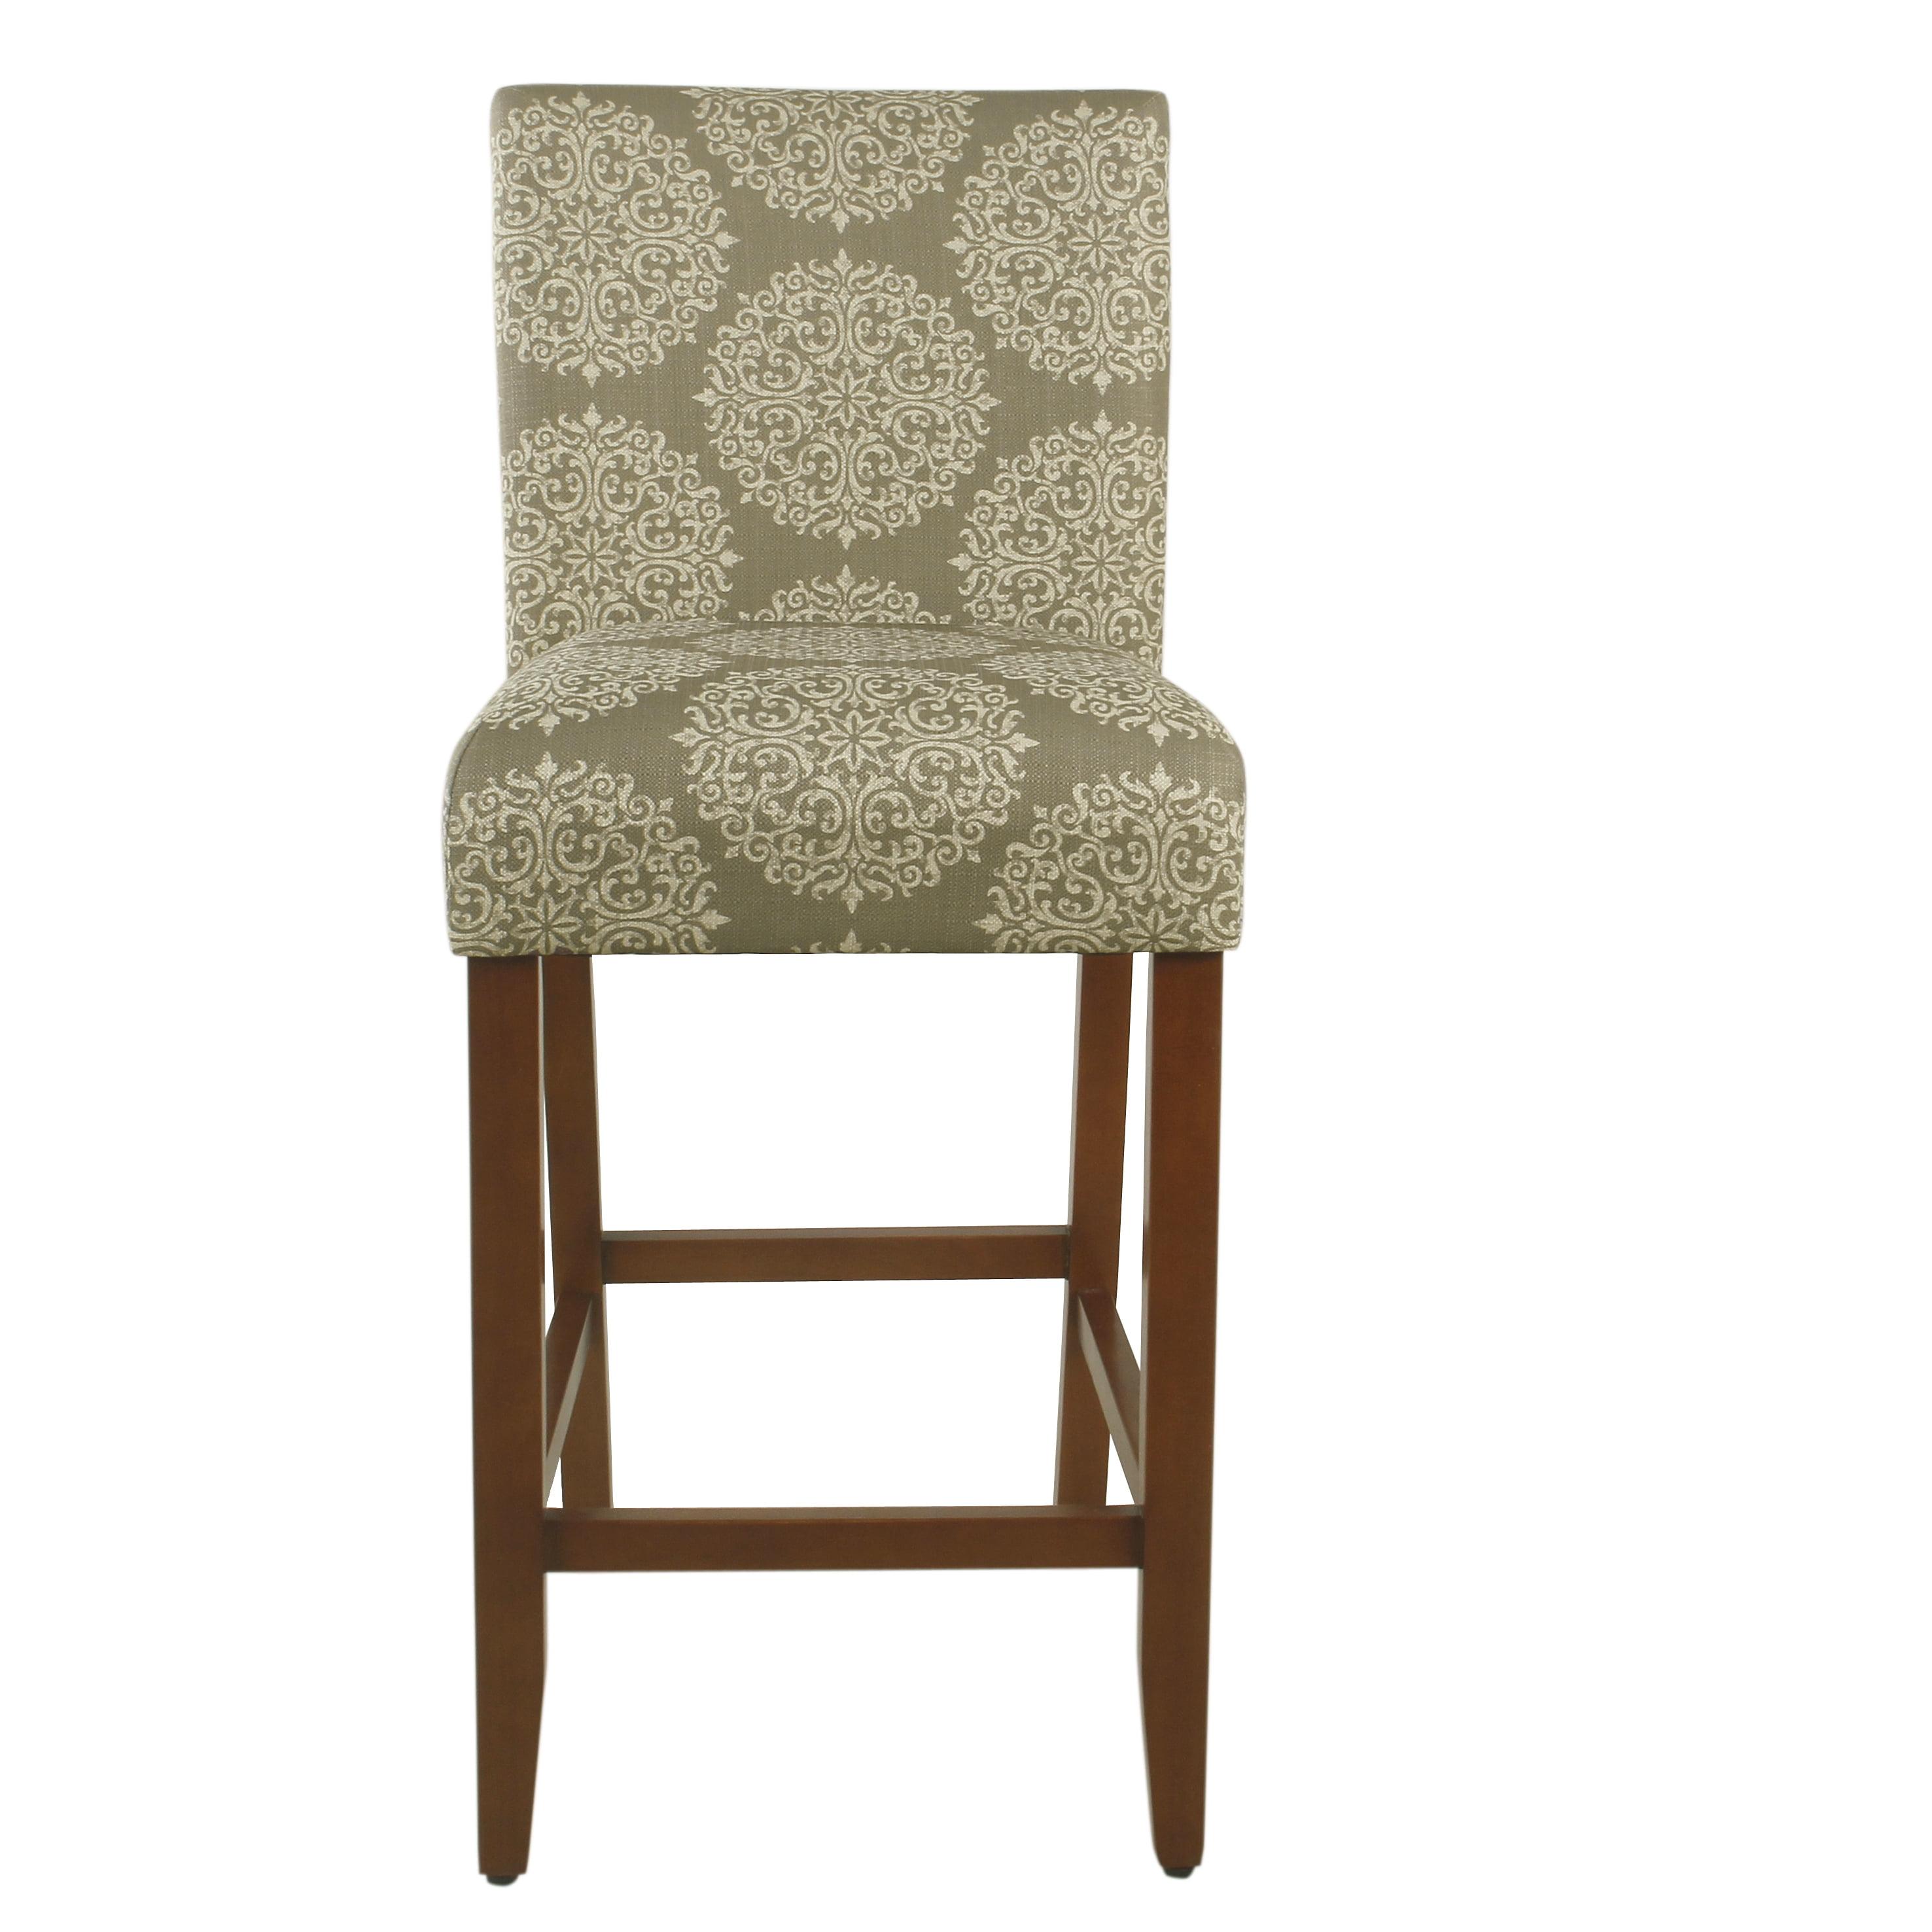 Braeburn Rustic Brown 29" Upholstered Barstool in Taupe and Cream Medallion